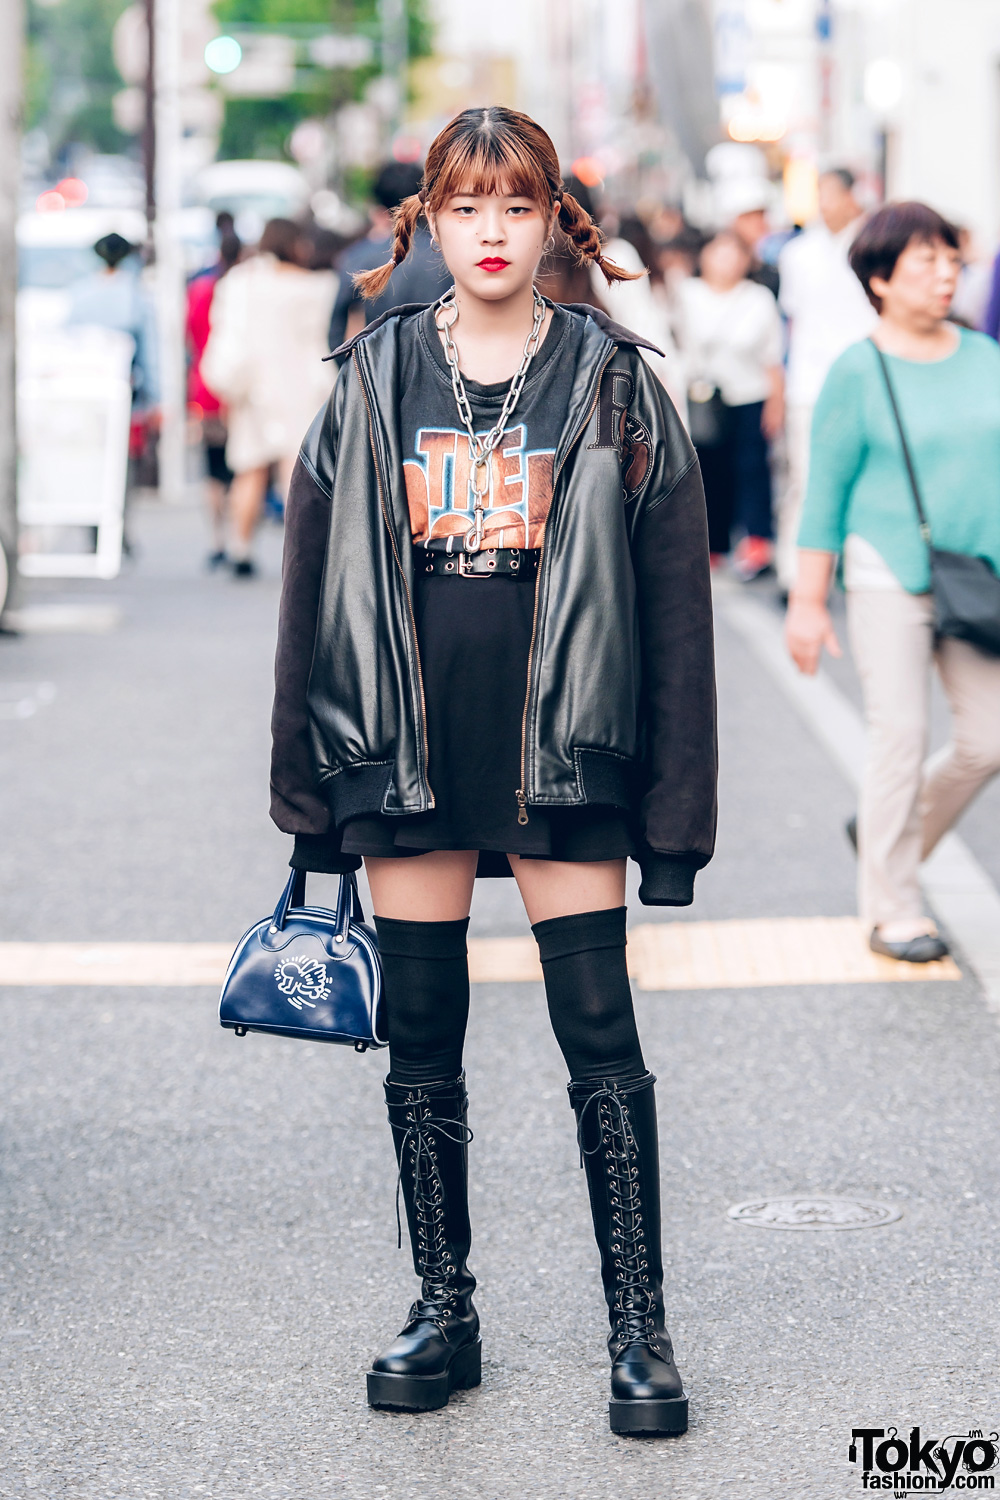 Harajuku Girl in Twin Braids and All-Black Vintage Street Style